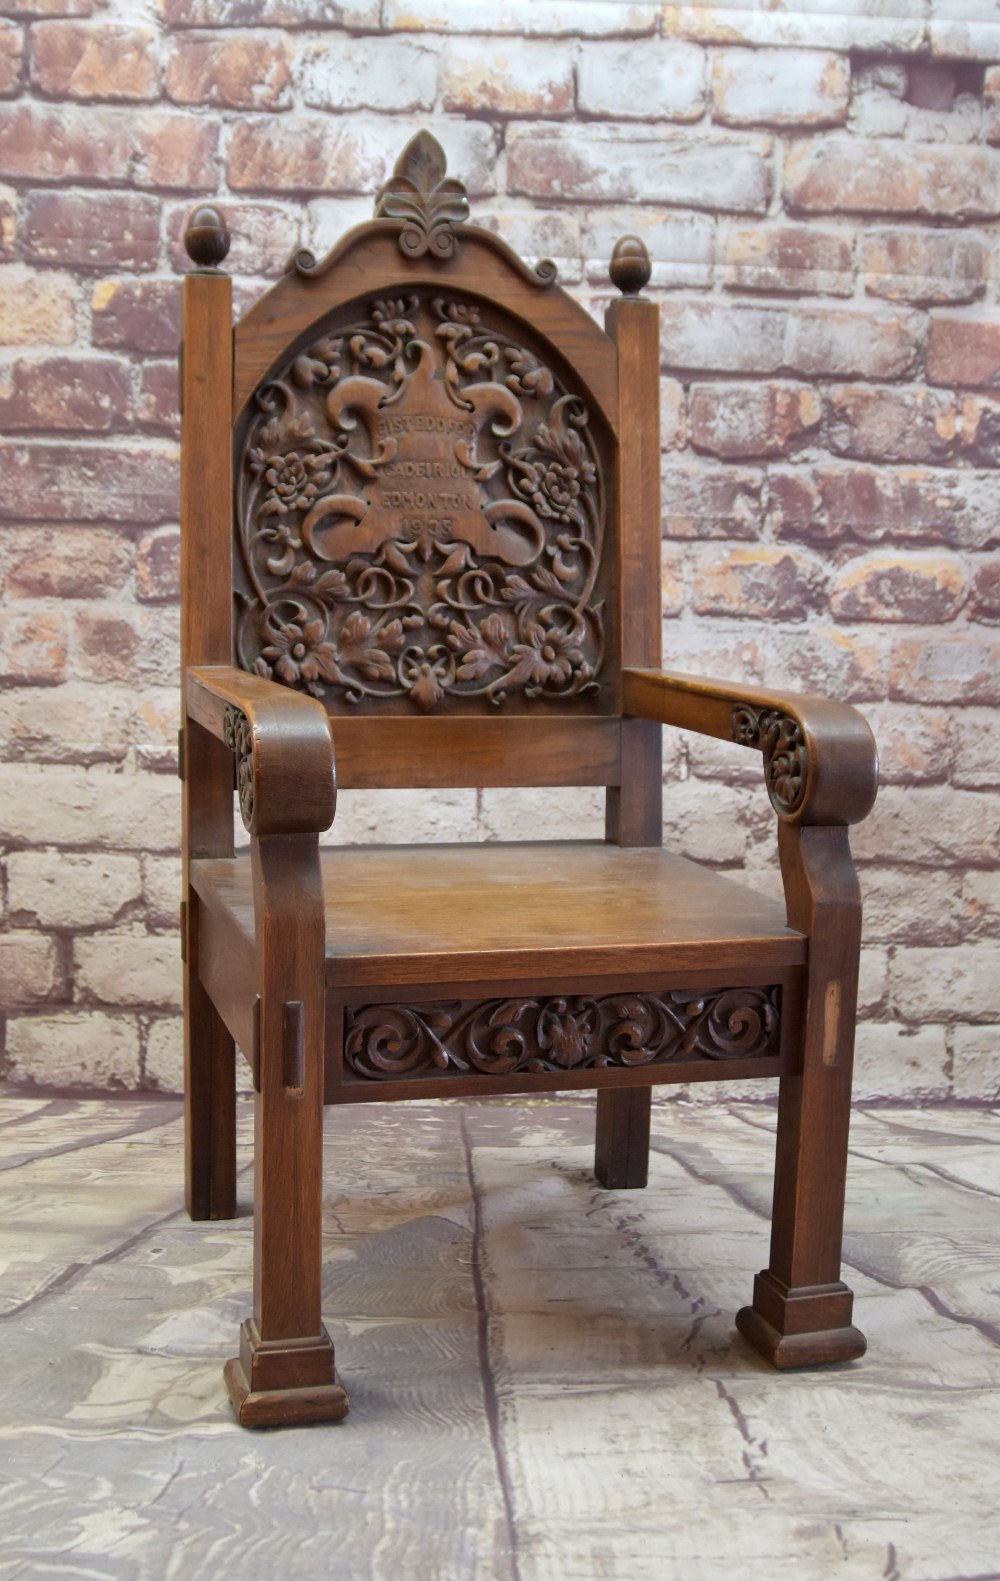 1935 EISTEDDFOD CHAIR FOR EDMONTON (NORTH LONDON) oak, carved inscription within cartouche and